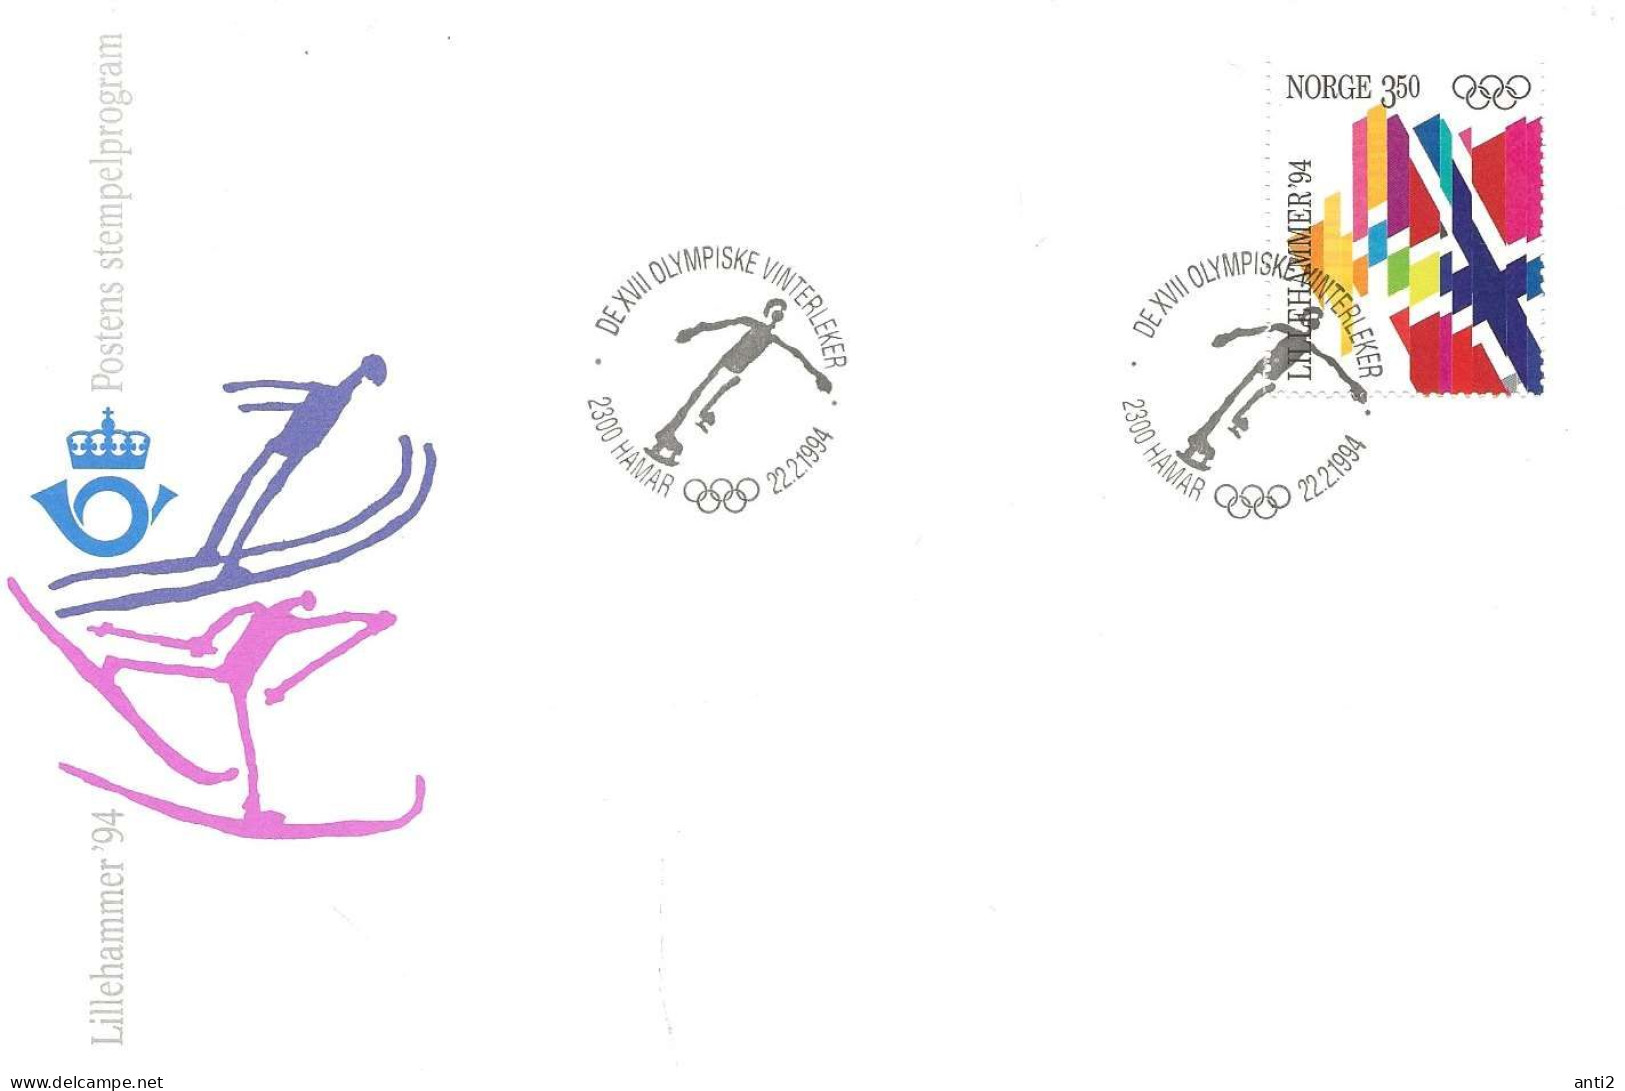 Norway Norge 1994 Winter Olympics, Lillehammer -  Flags Mi 1145 Special Cover Skating CancelledHamar 22.2.94 - Covers & Documents